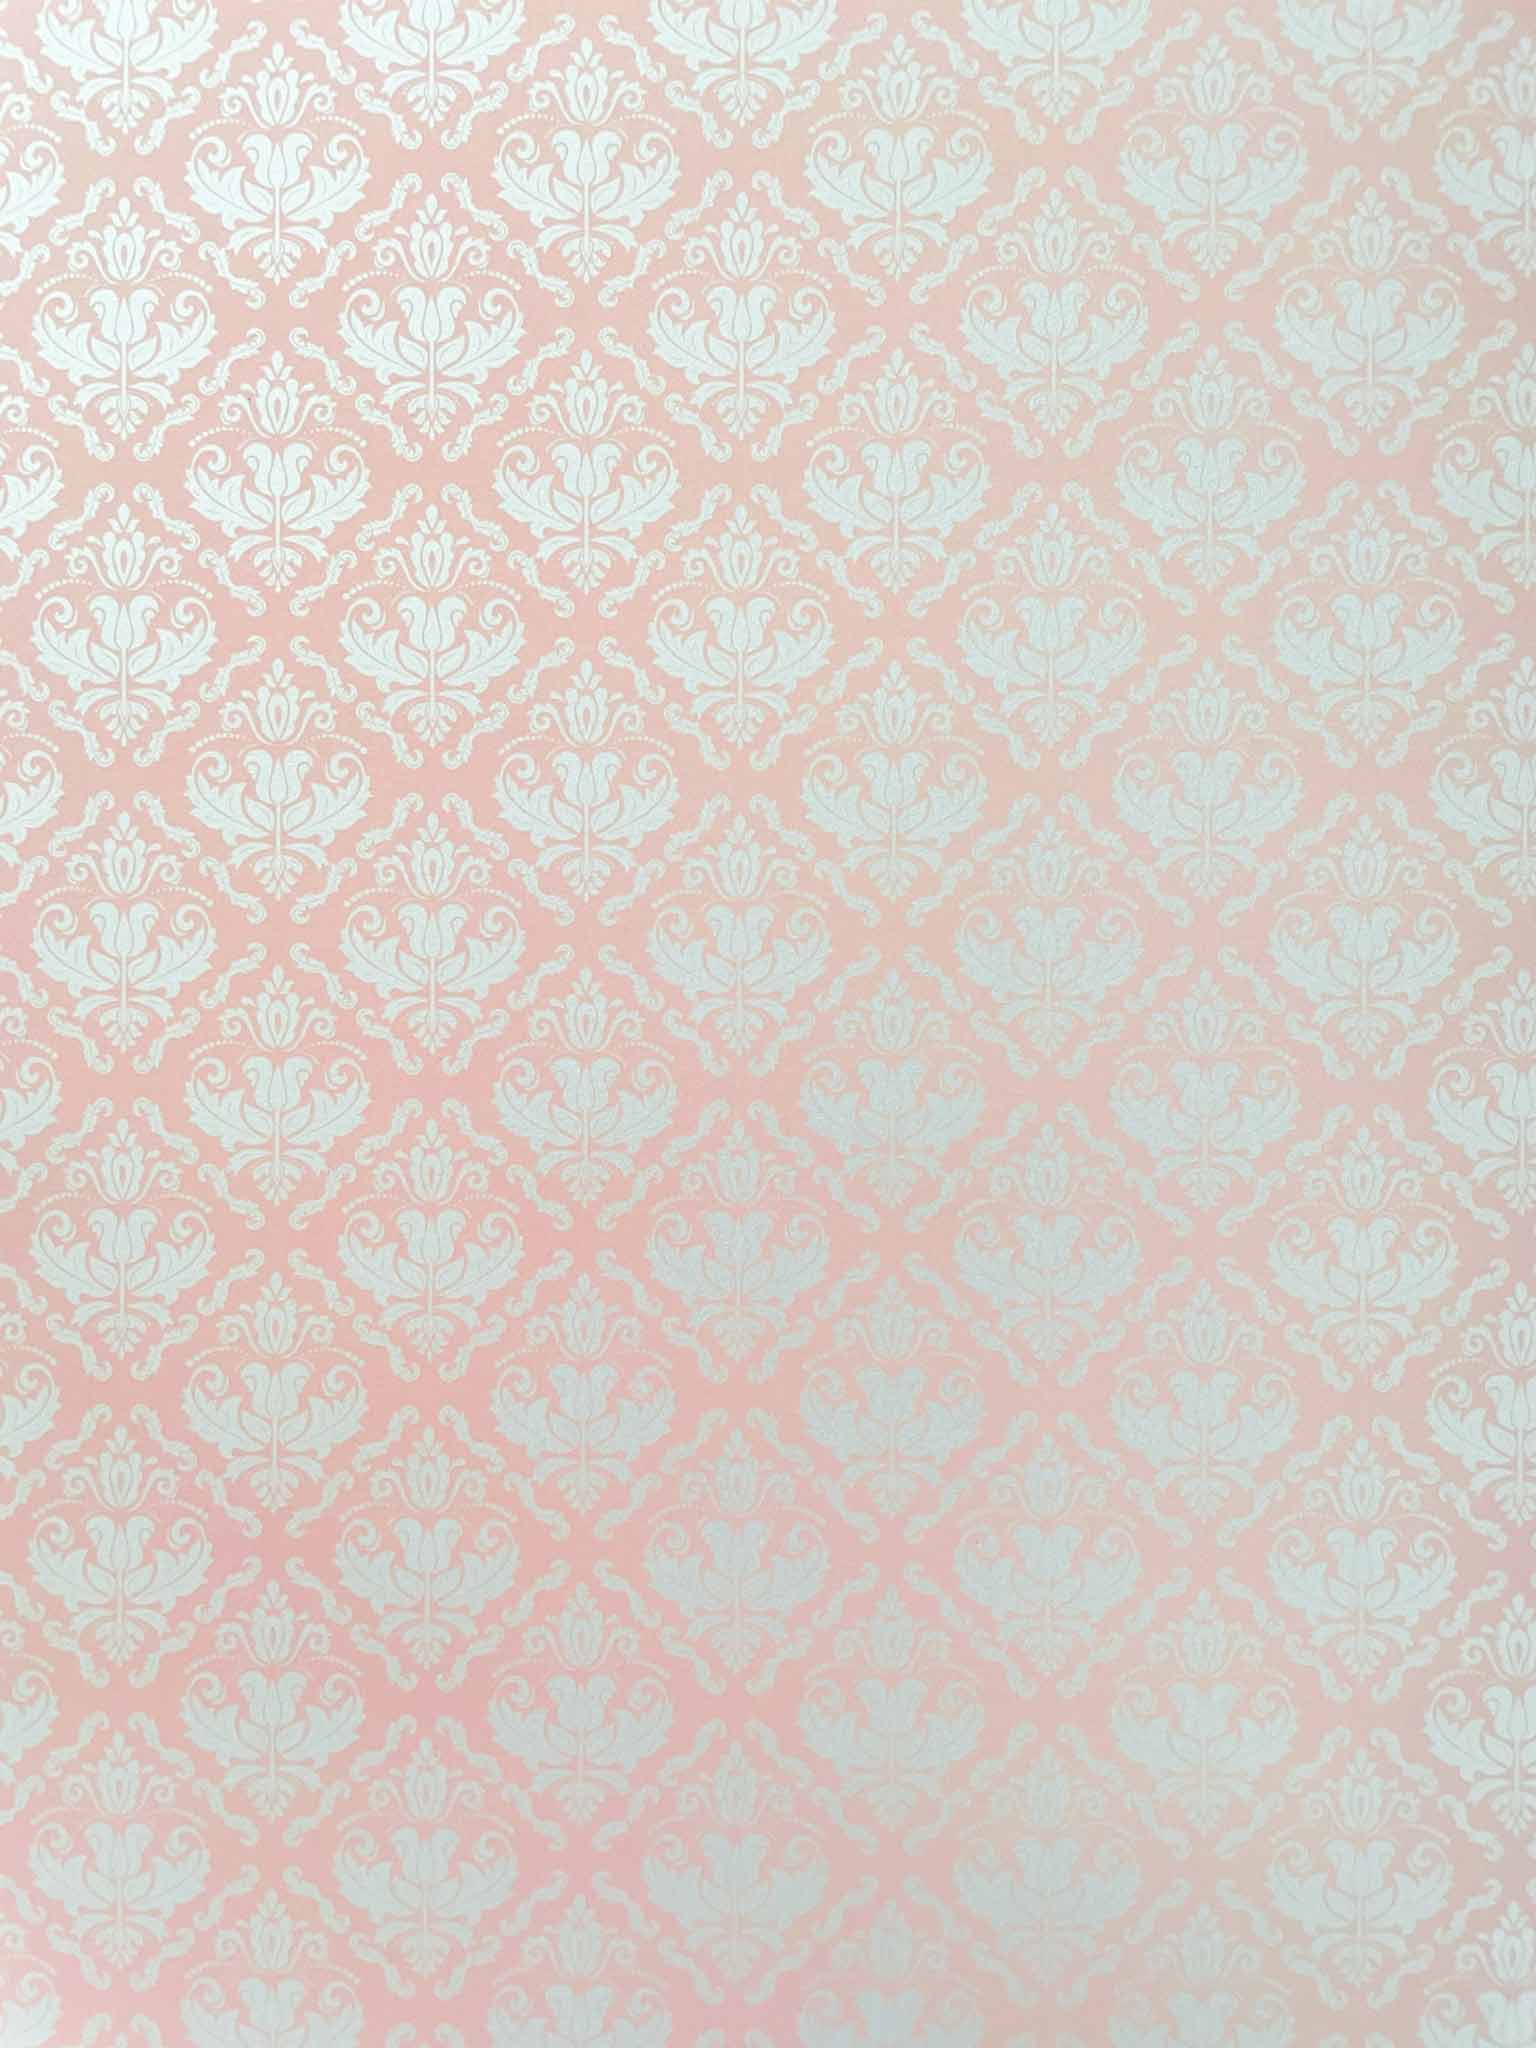 pink-and-white-damask-pattern-a4-paper